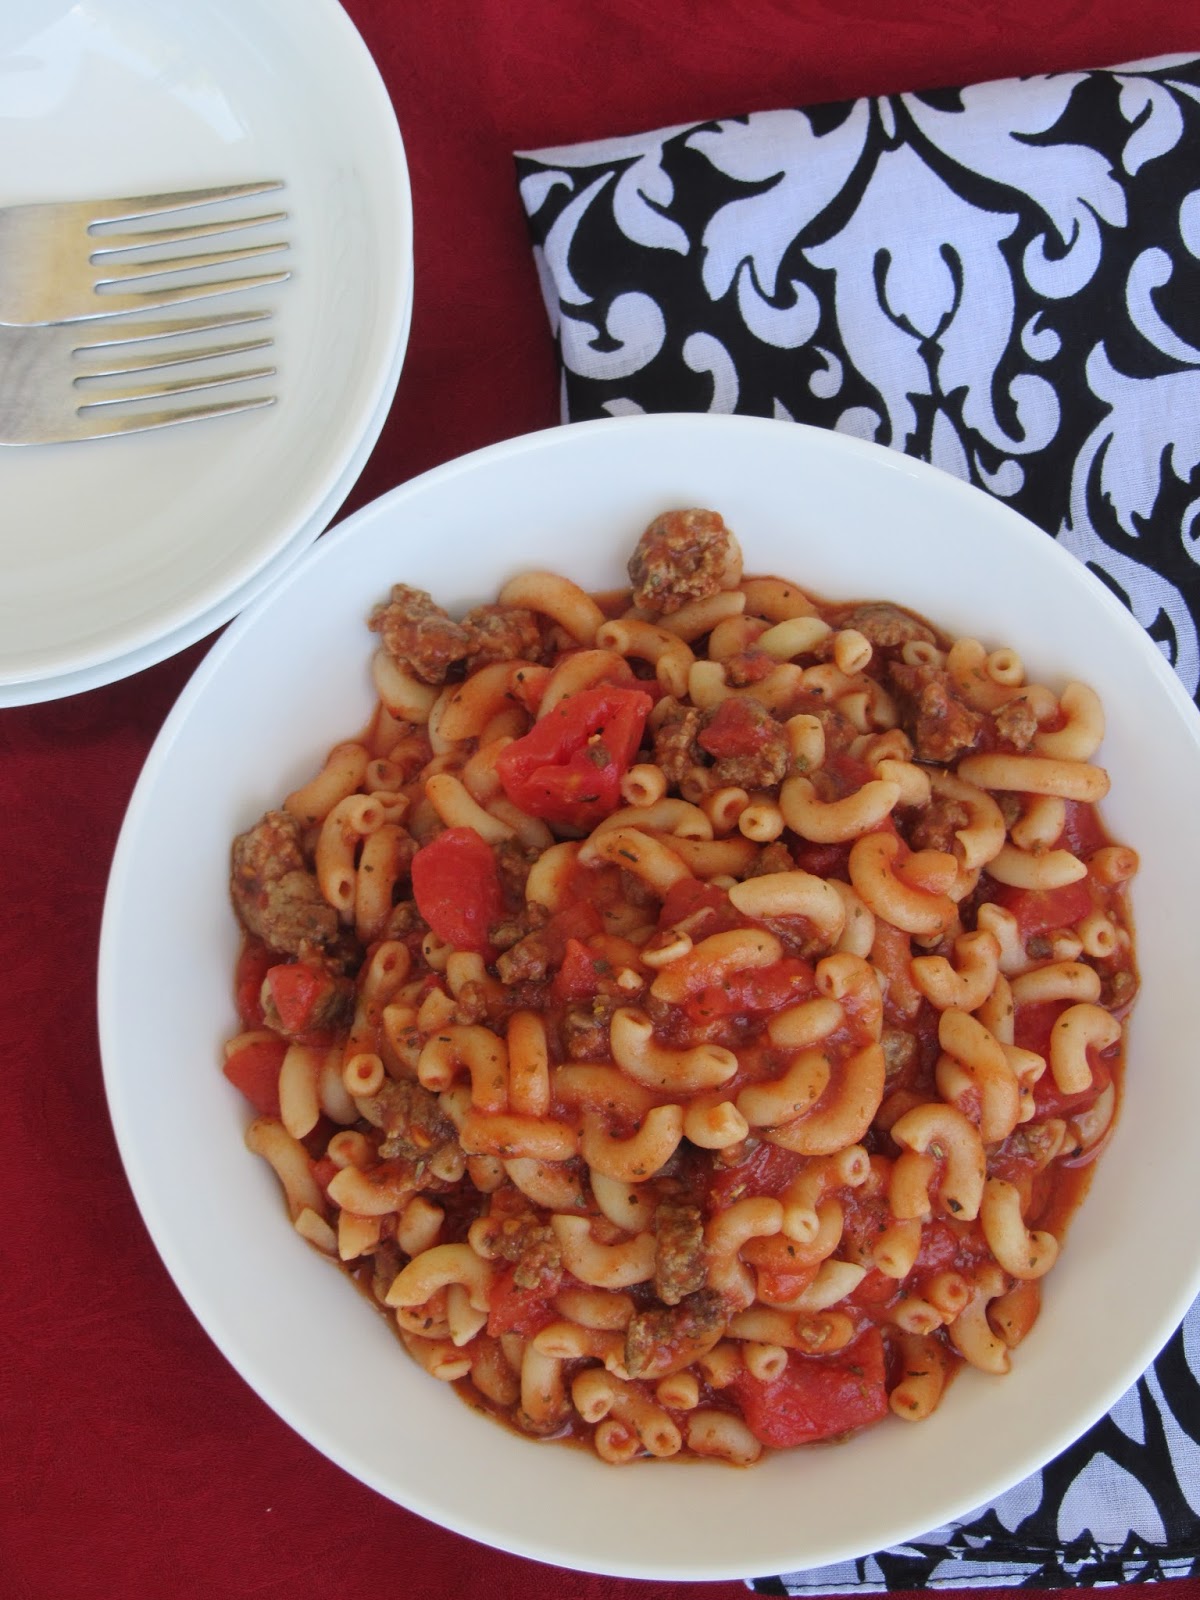 Been There Baked That: Grandma's Goulash